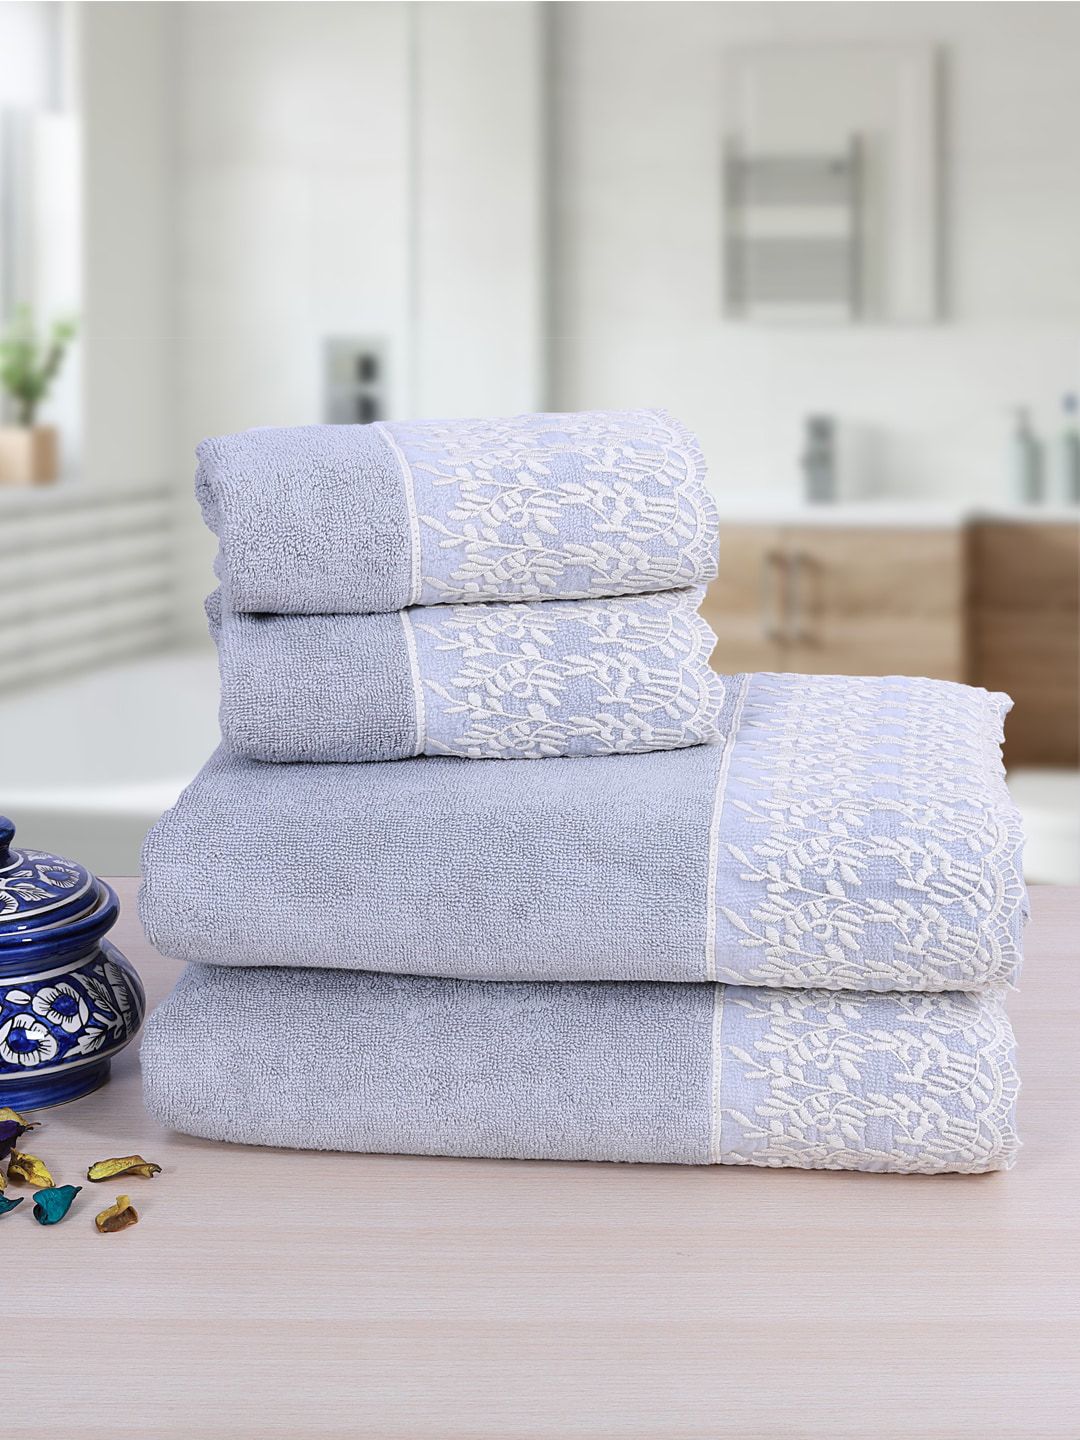 RANGOLI Set Of 4 Grey & White Embroidered 550 GSM Towels Price in India